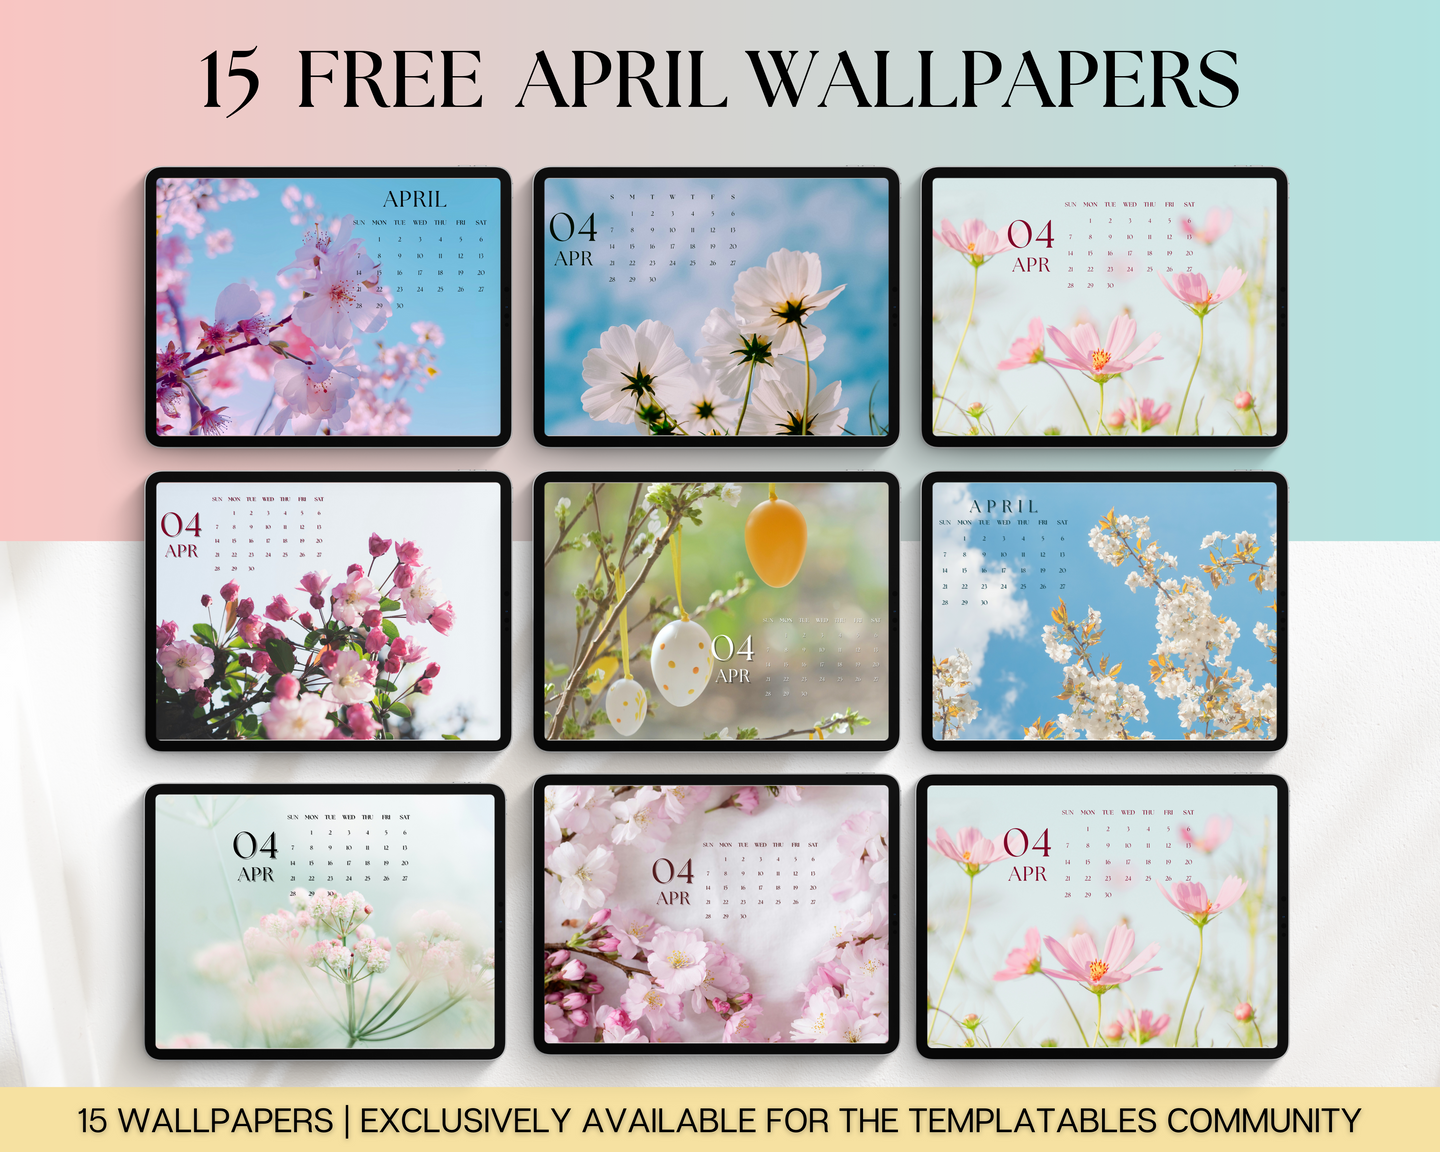 April 2024 Wallpapers for iPad - 15 FREE iPad Wallpapers